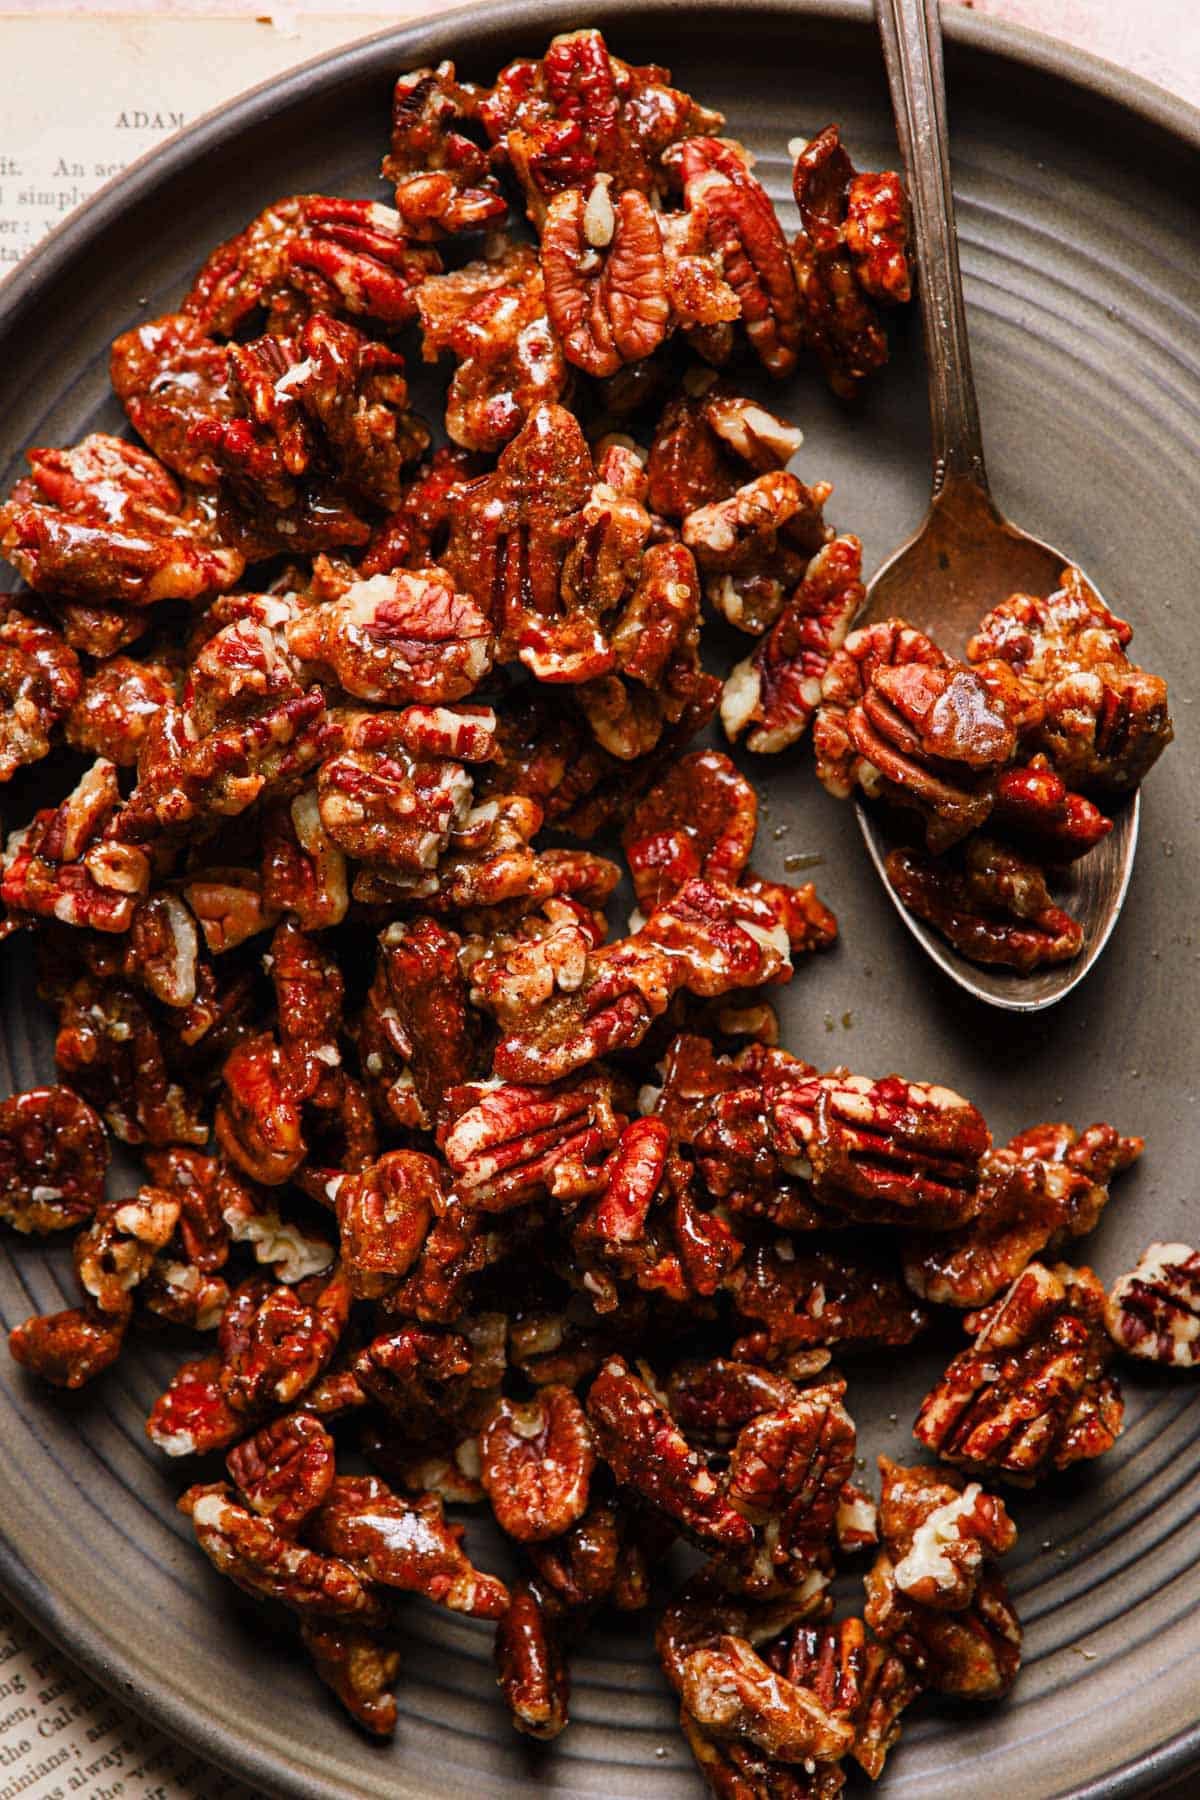 Caramelized candied pecans recipe on the stovetop. Easy and ready in 10 minutes.